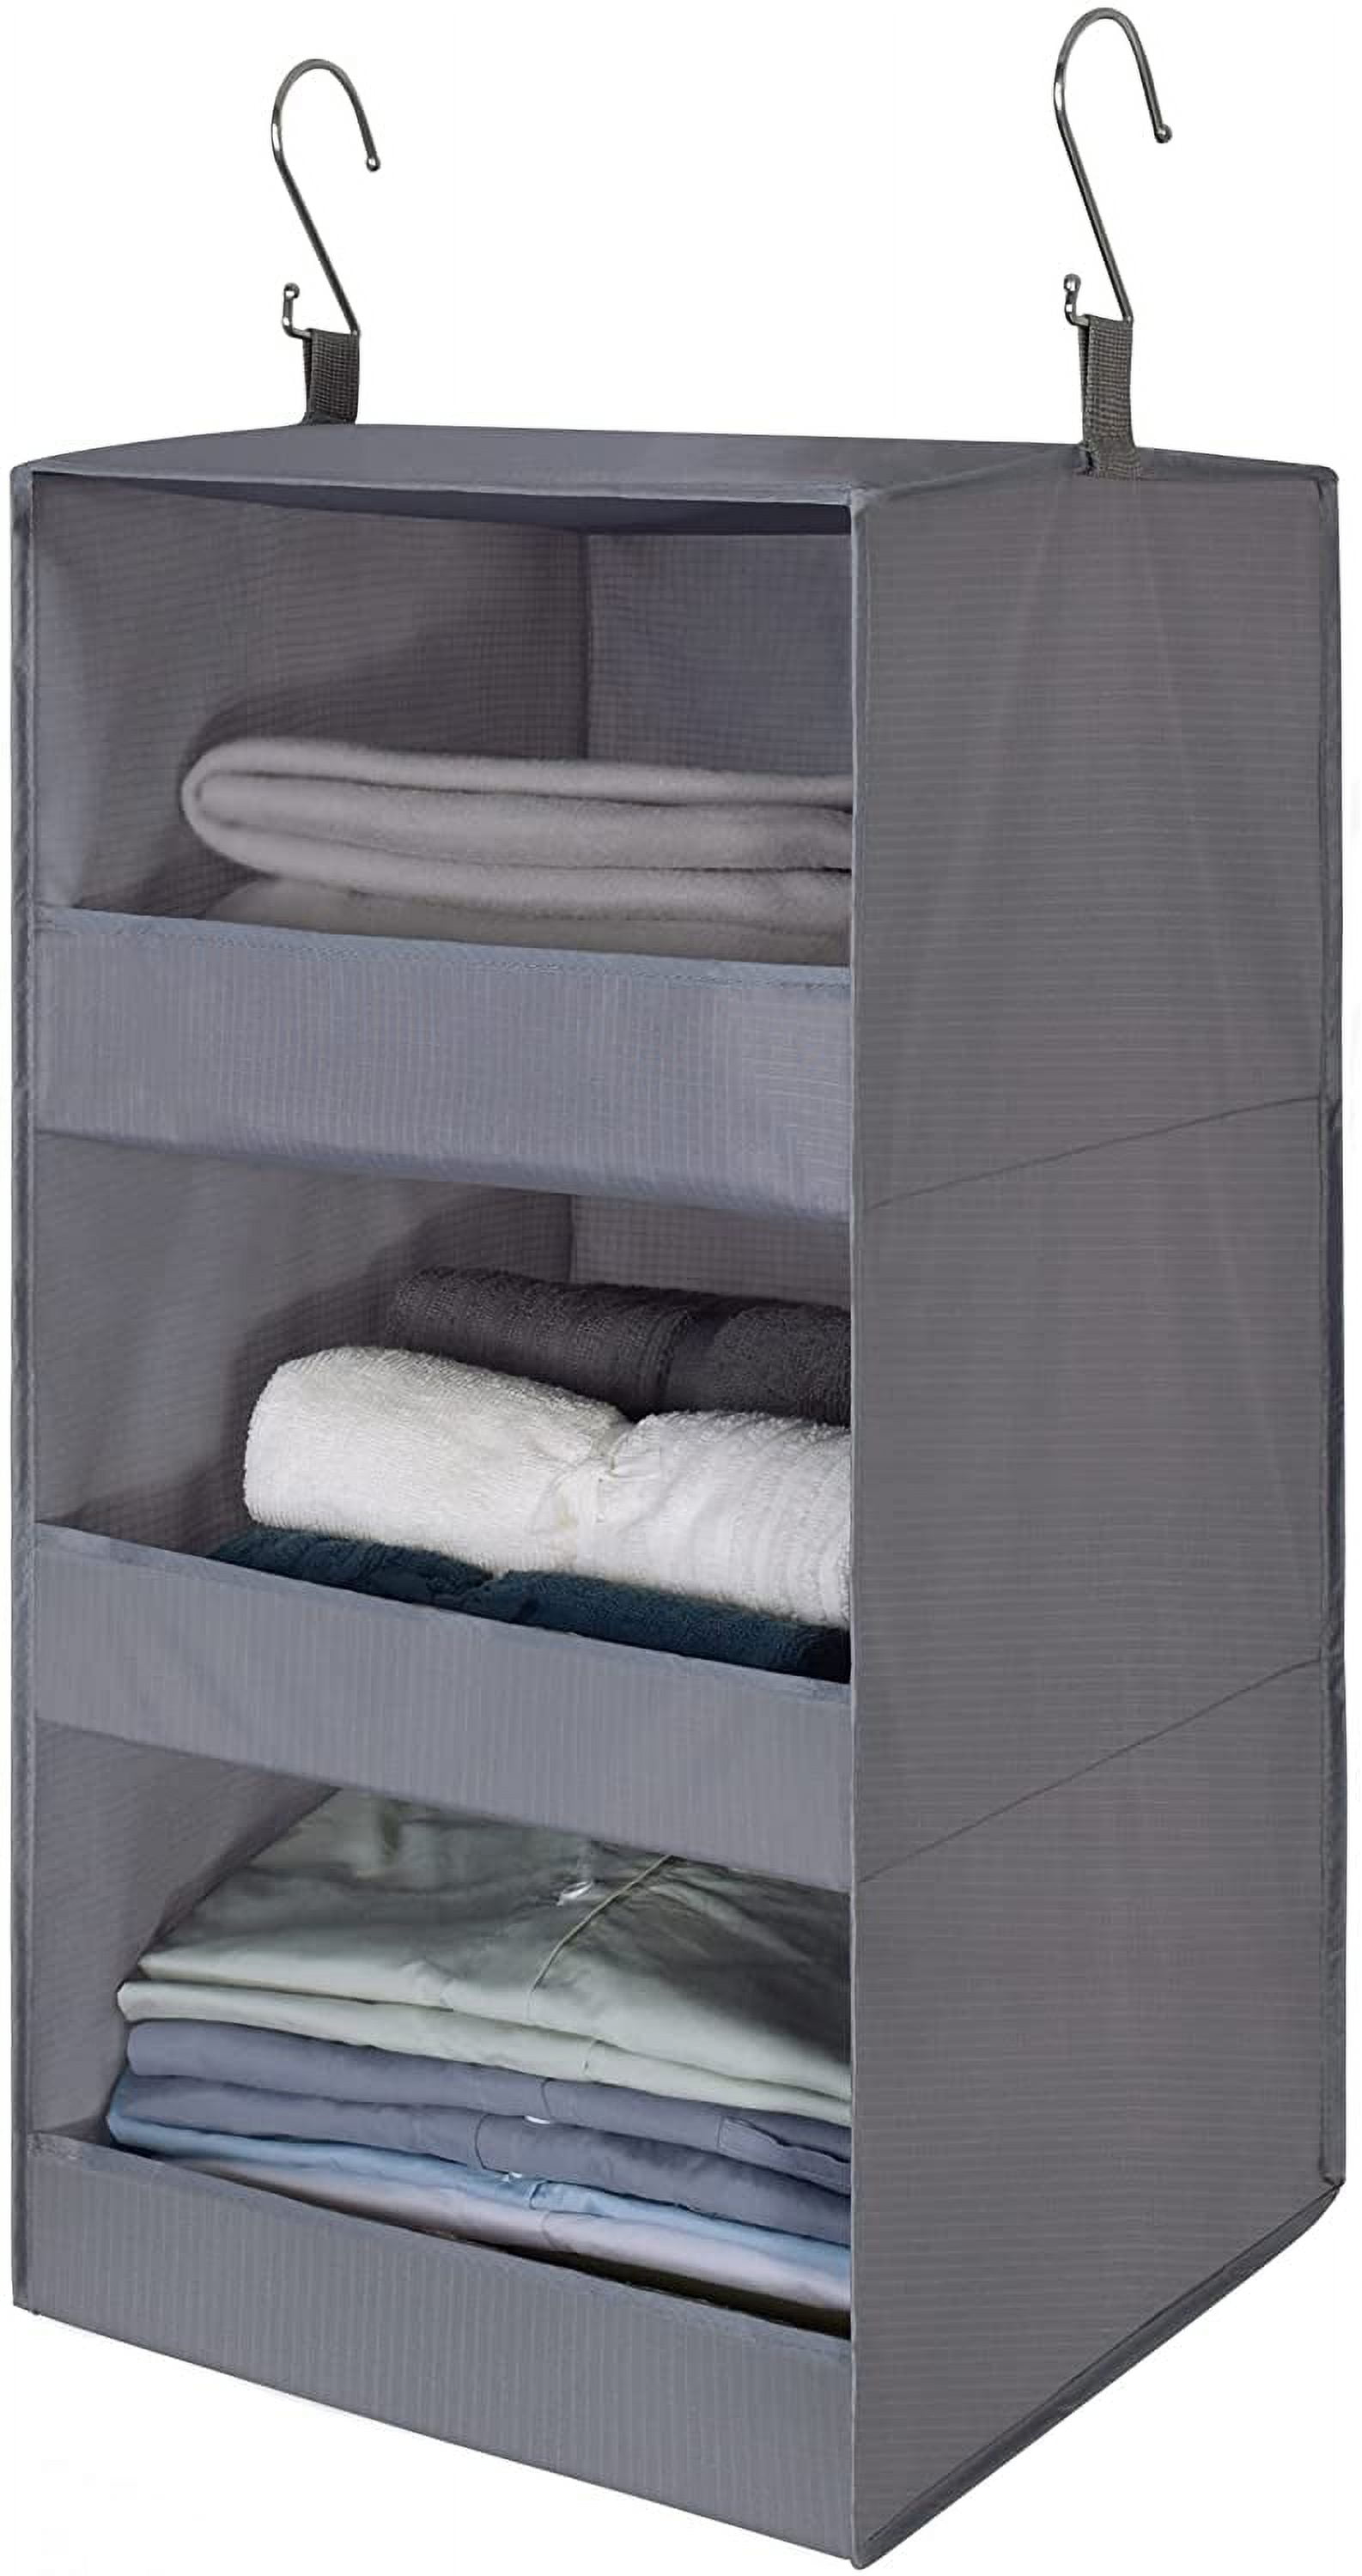 The Container Store 3-Compartment Hanging Closet Organizer Grey, 12 x 12 x 29 H